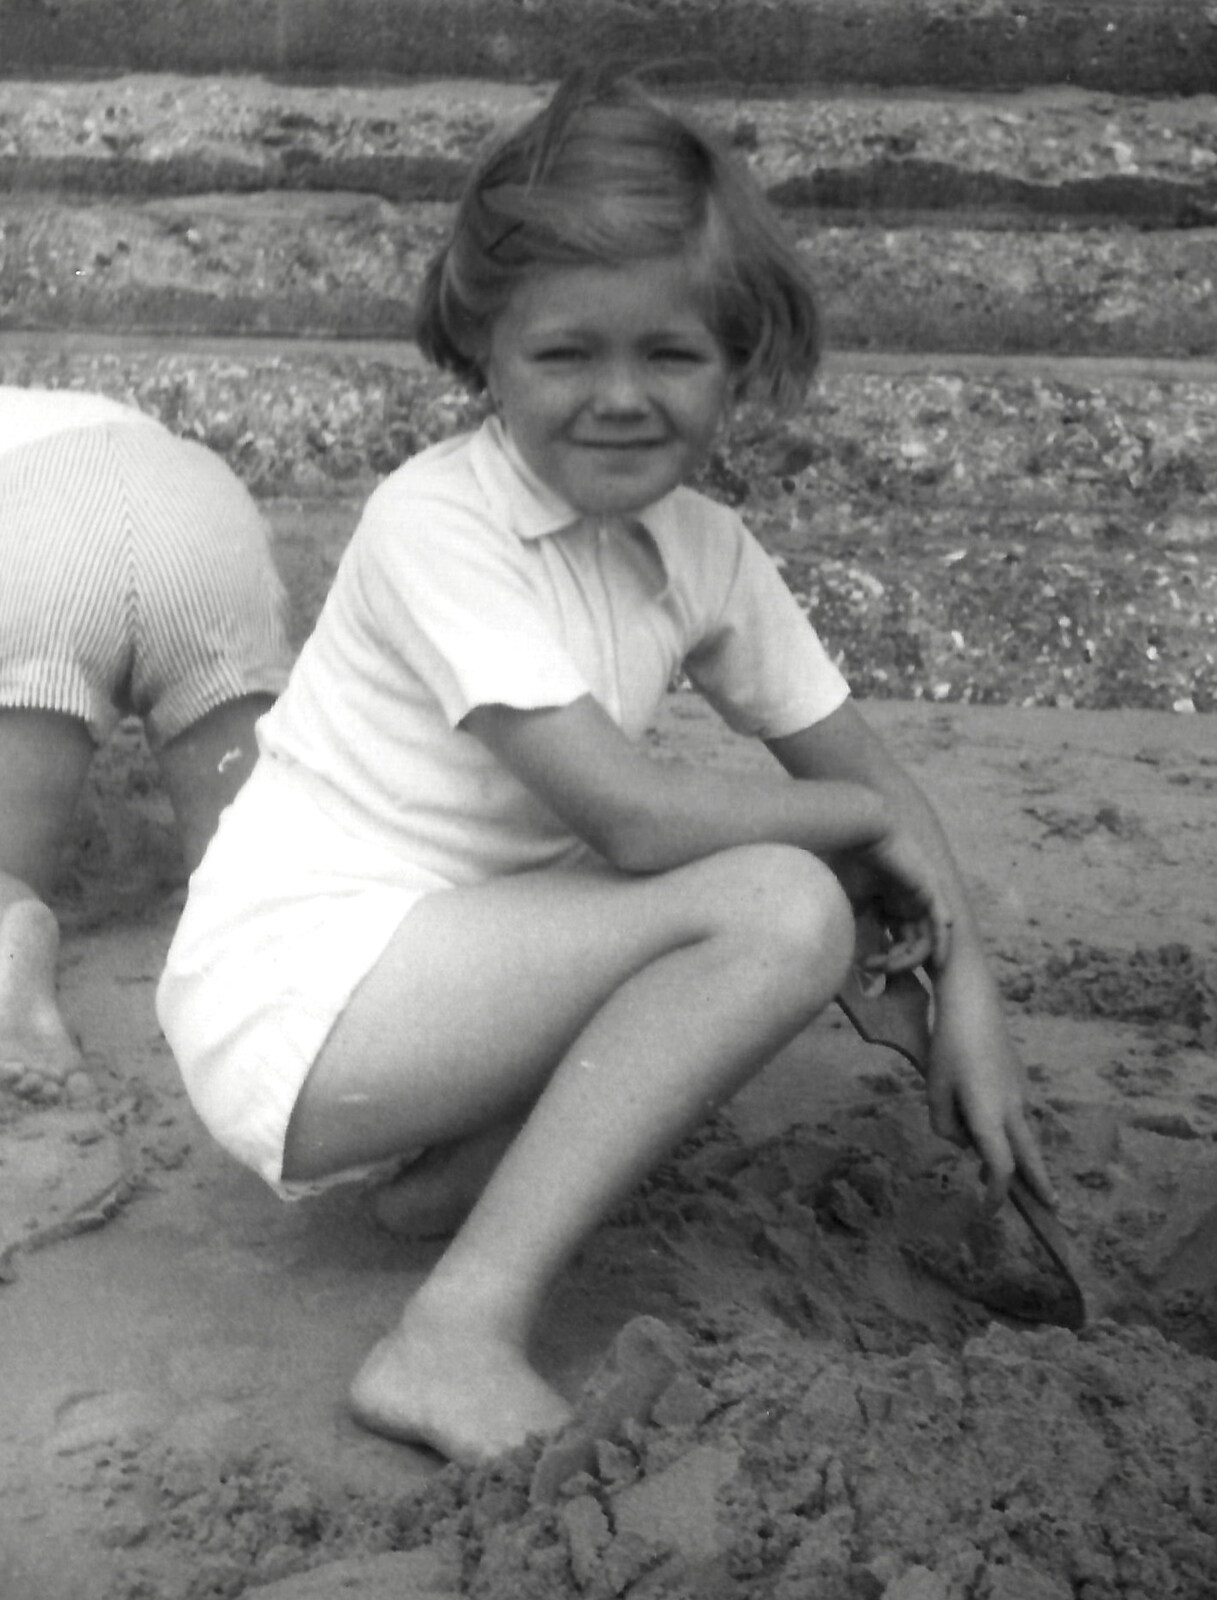 Janet in a sandpit from Family History: The 1940s and 1950s - 24th January 2020